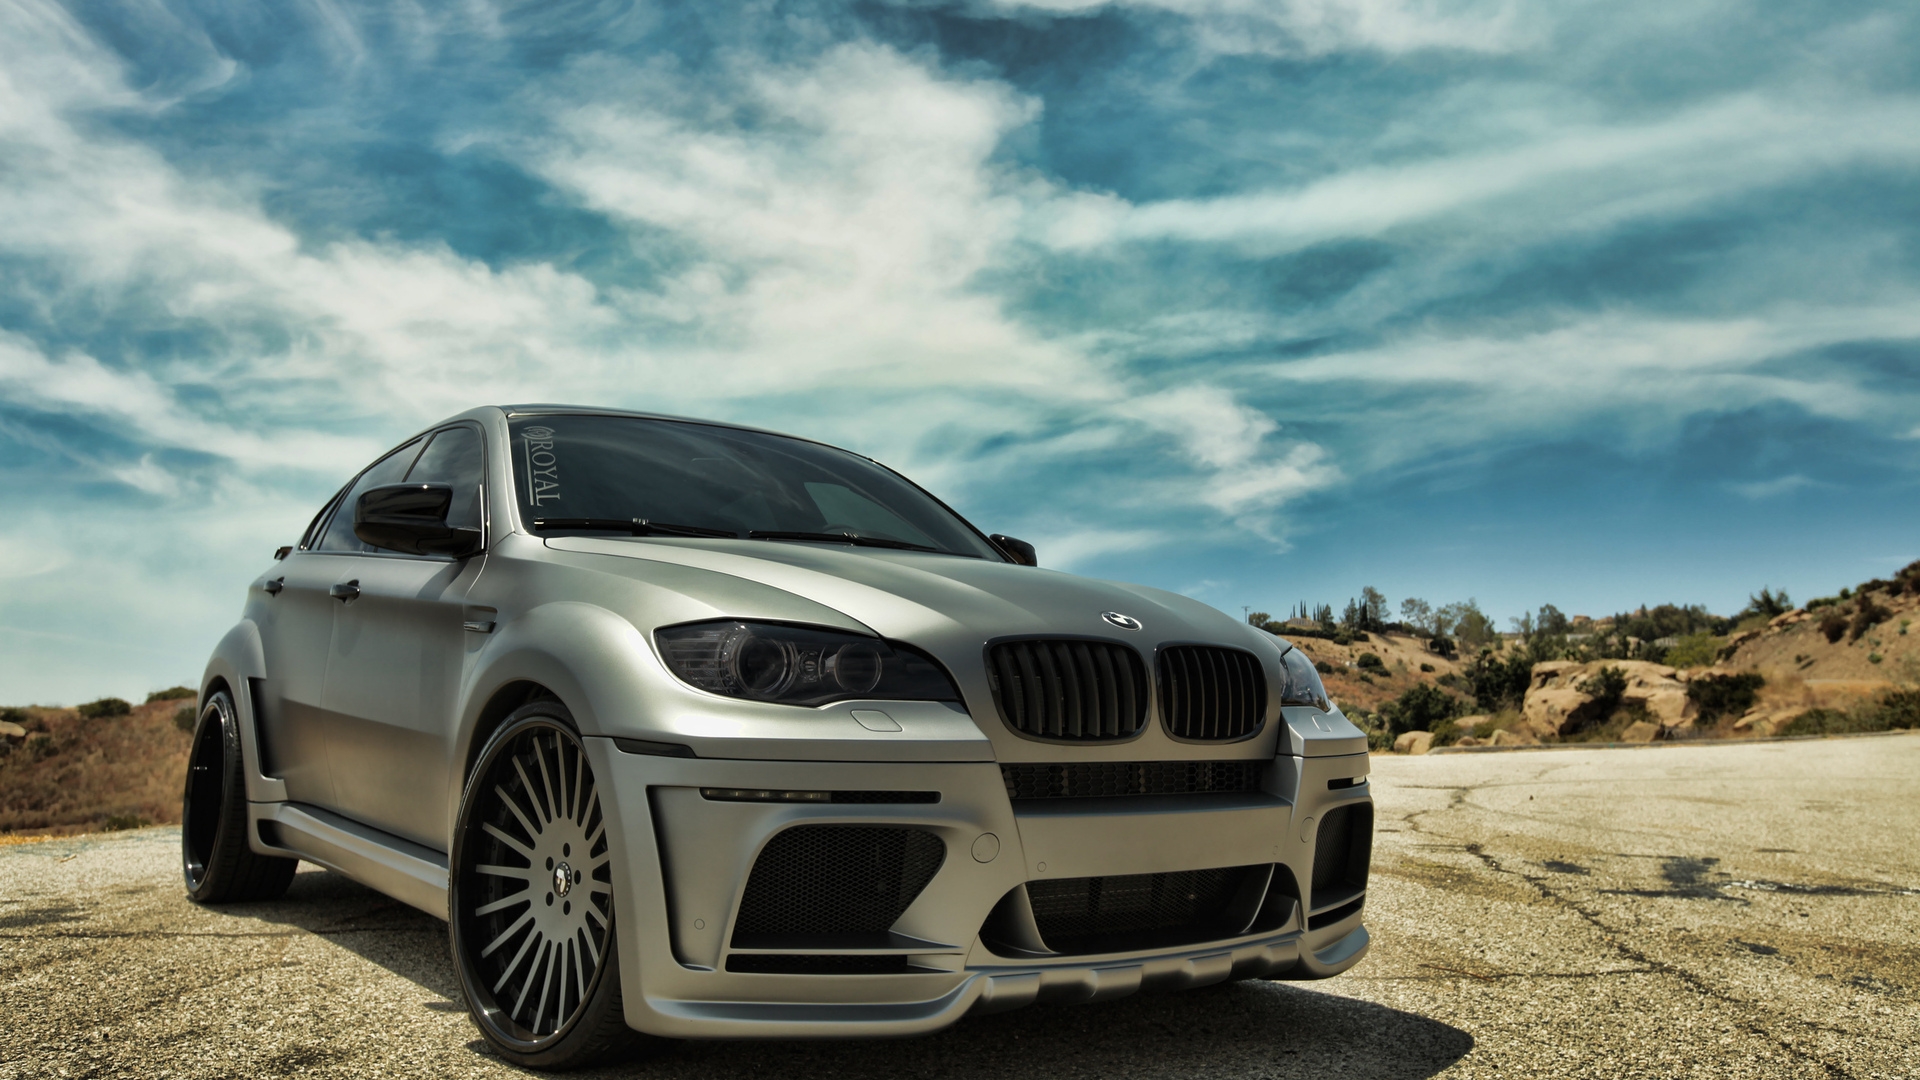 BMW Tuning Car for 1920 x 1080 HDTV 1080p resolution